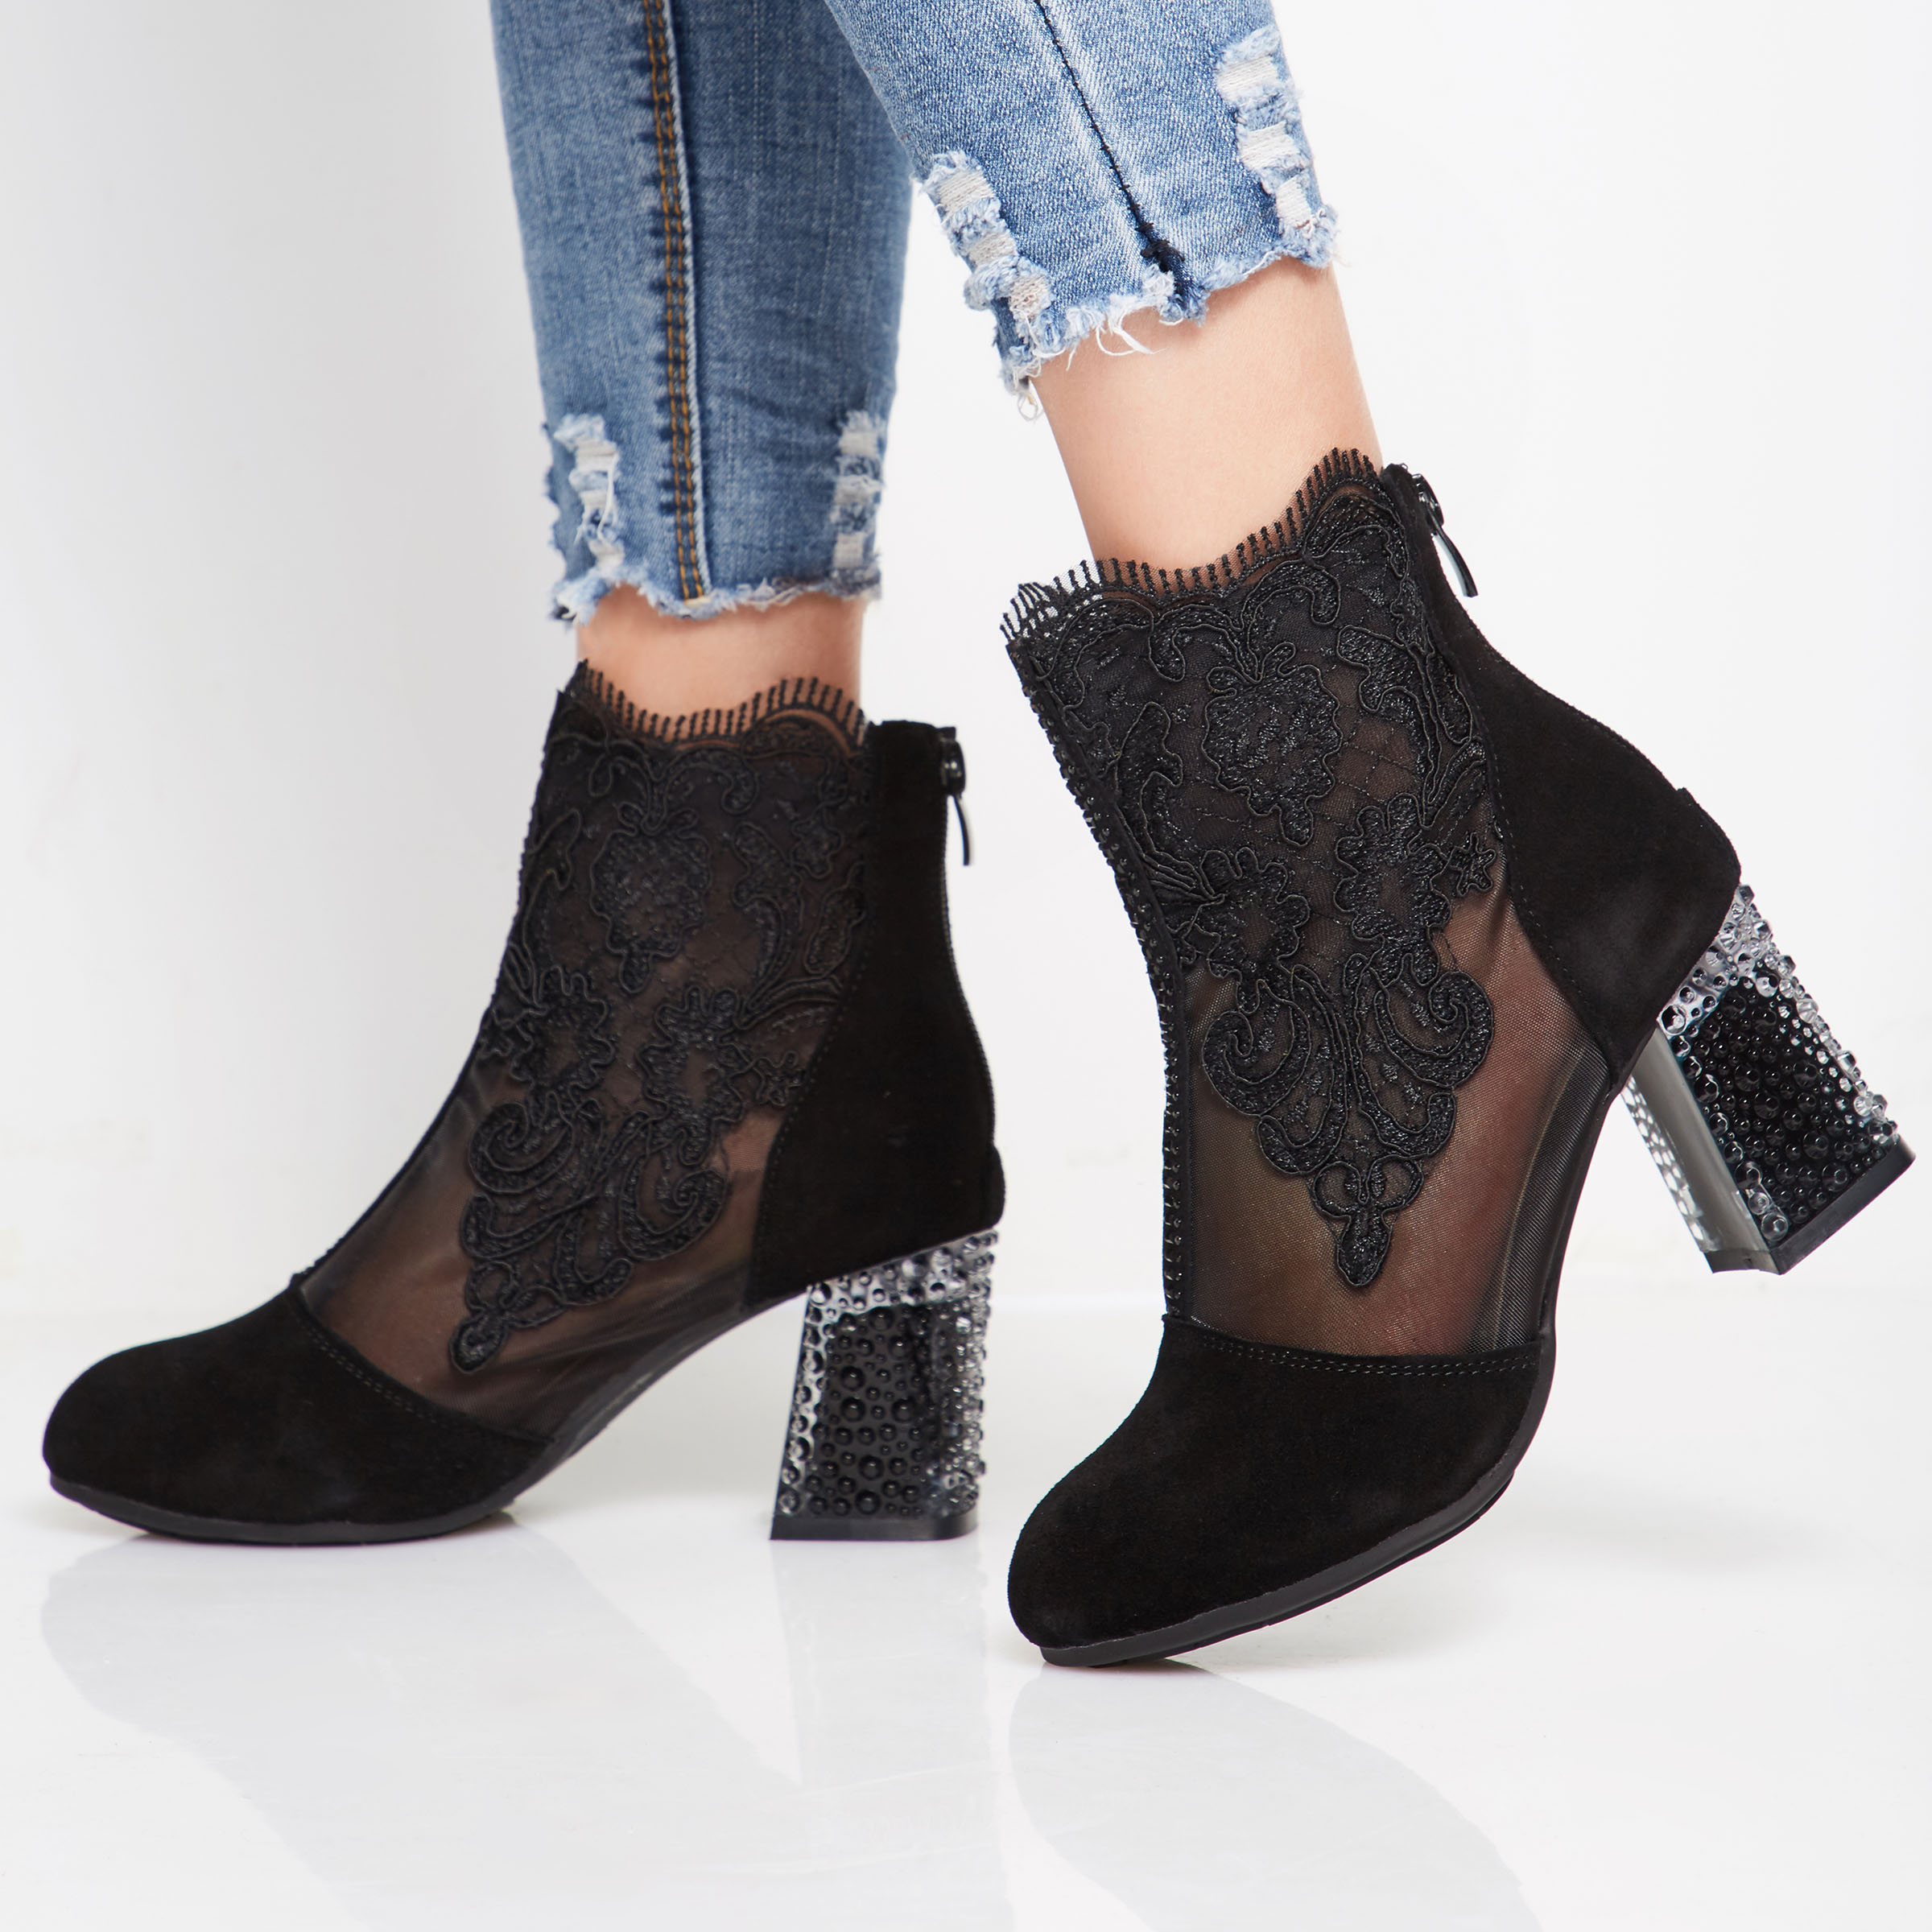 Floral Embroidery Lace Rhinestone Women's Black Ankle Boots